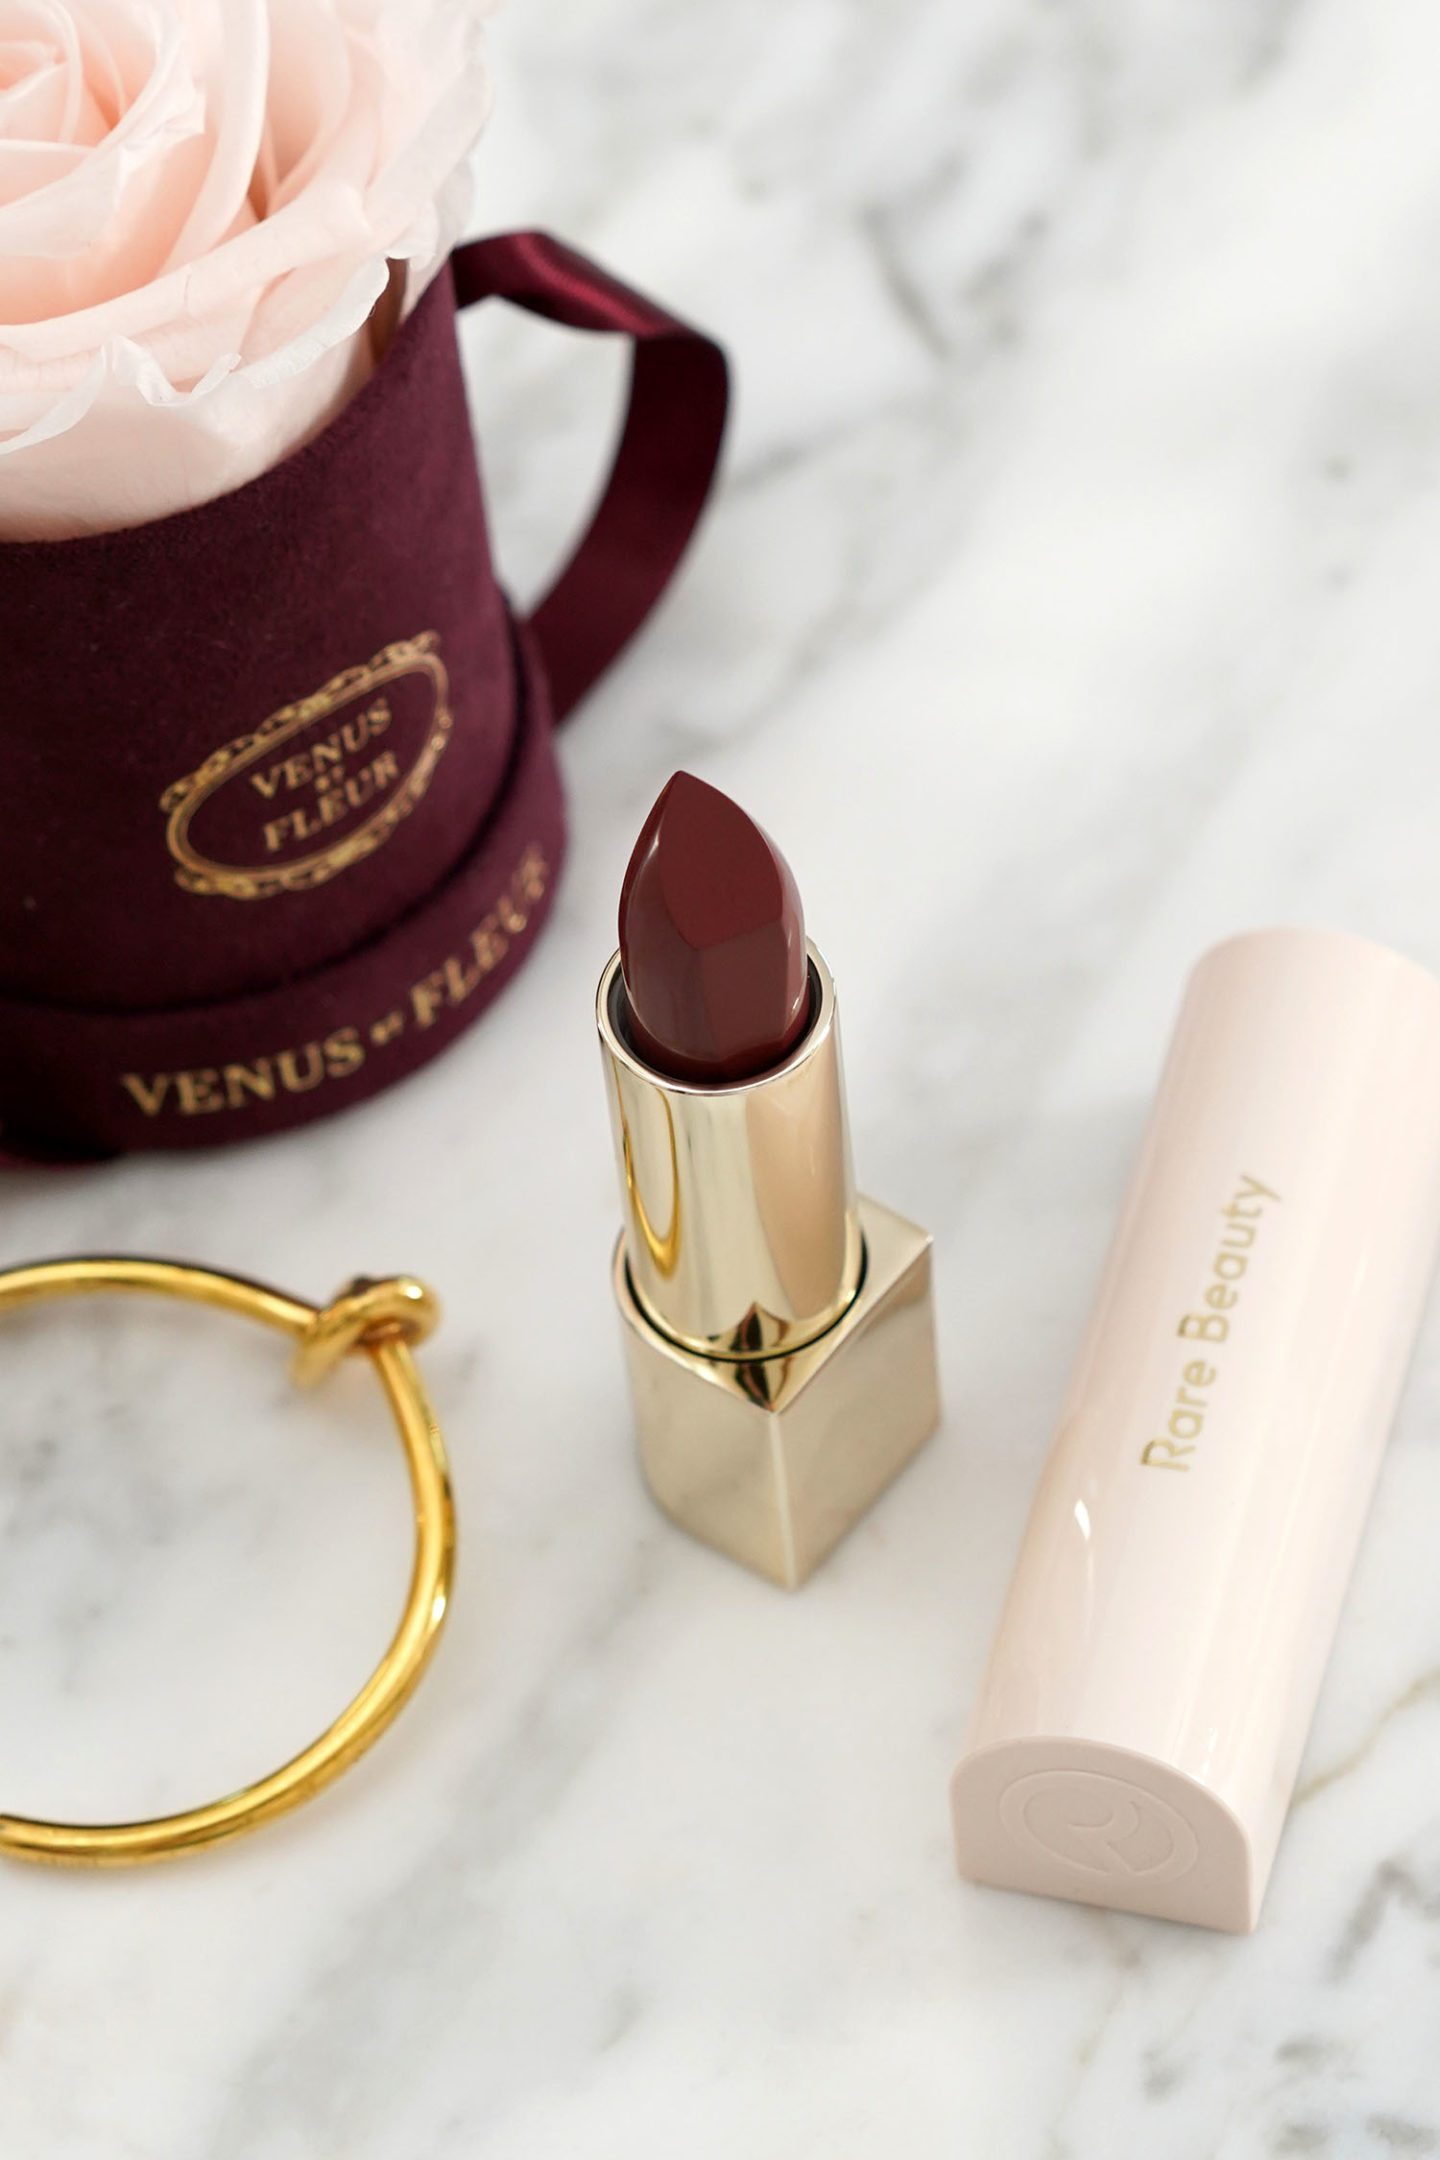 Rare Beauty Kind Words Matte Lipstick in Gifted 